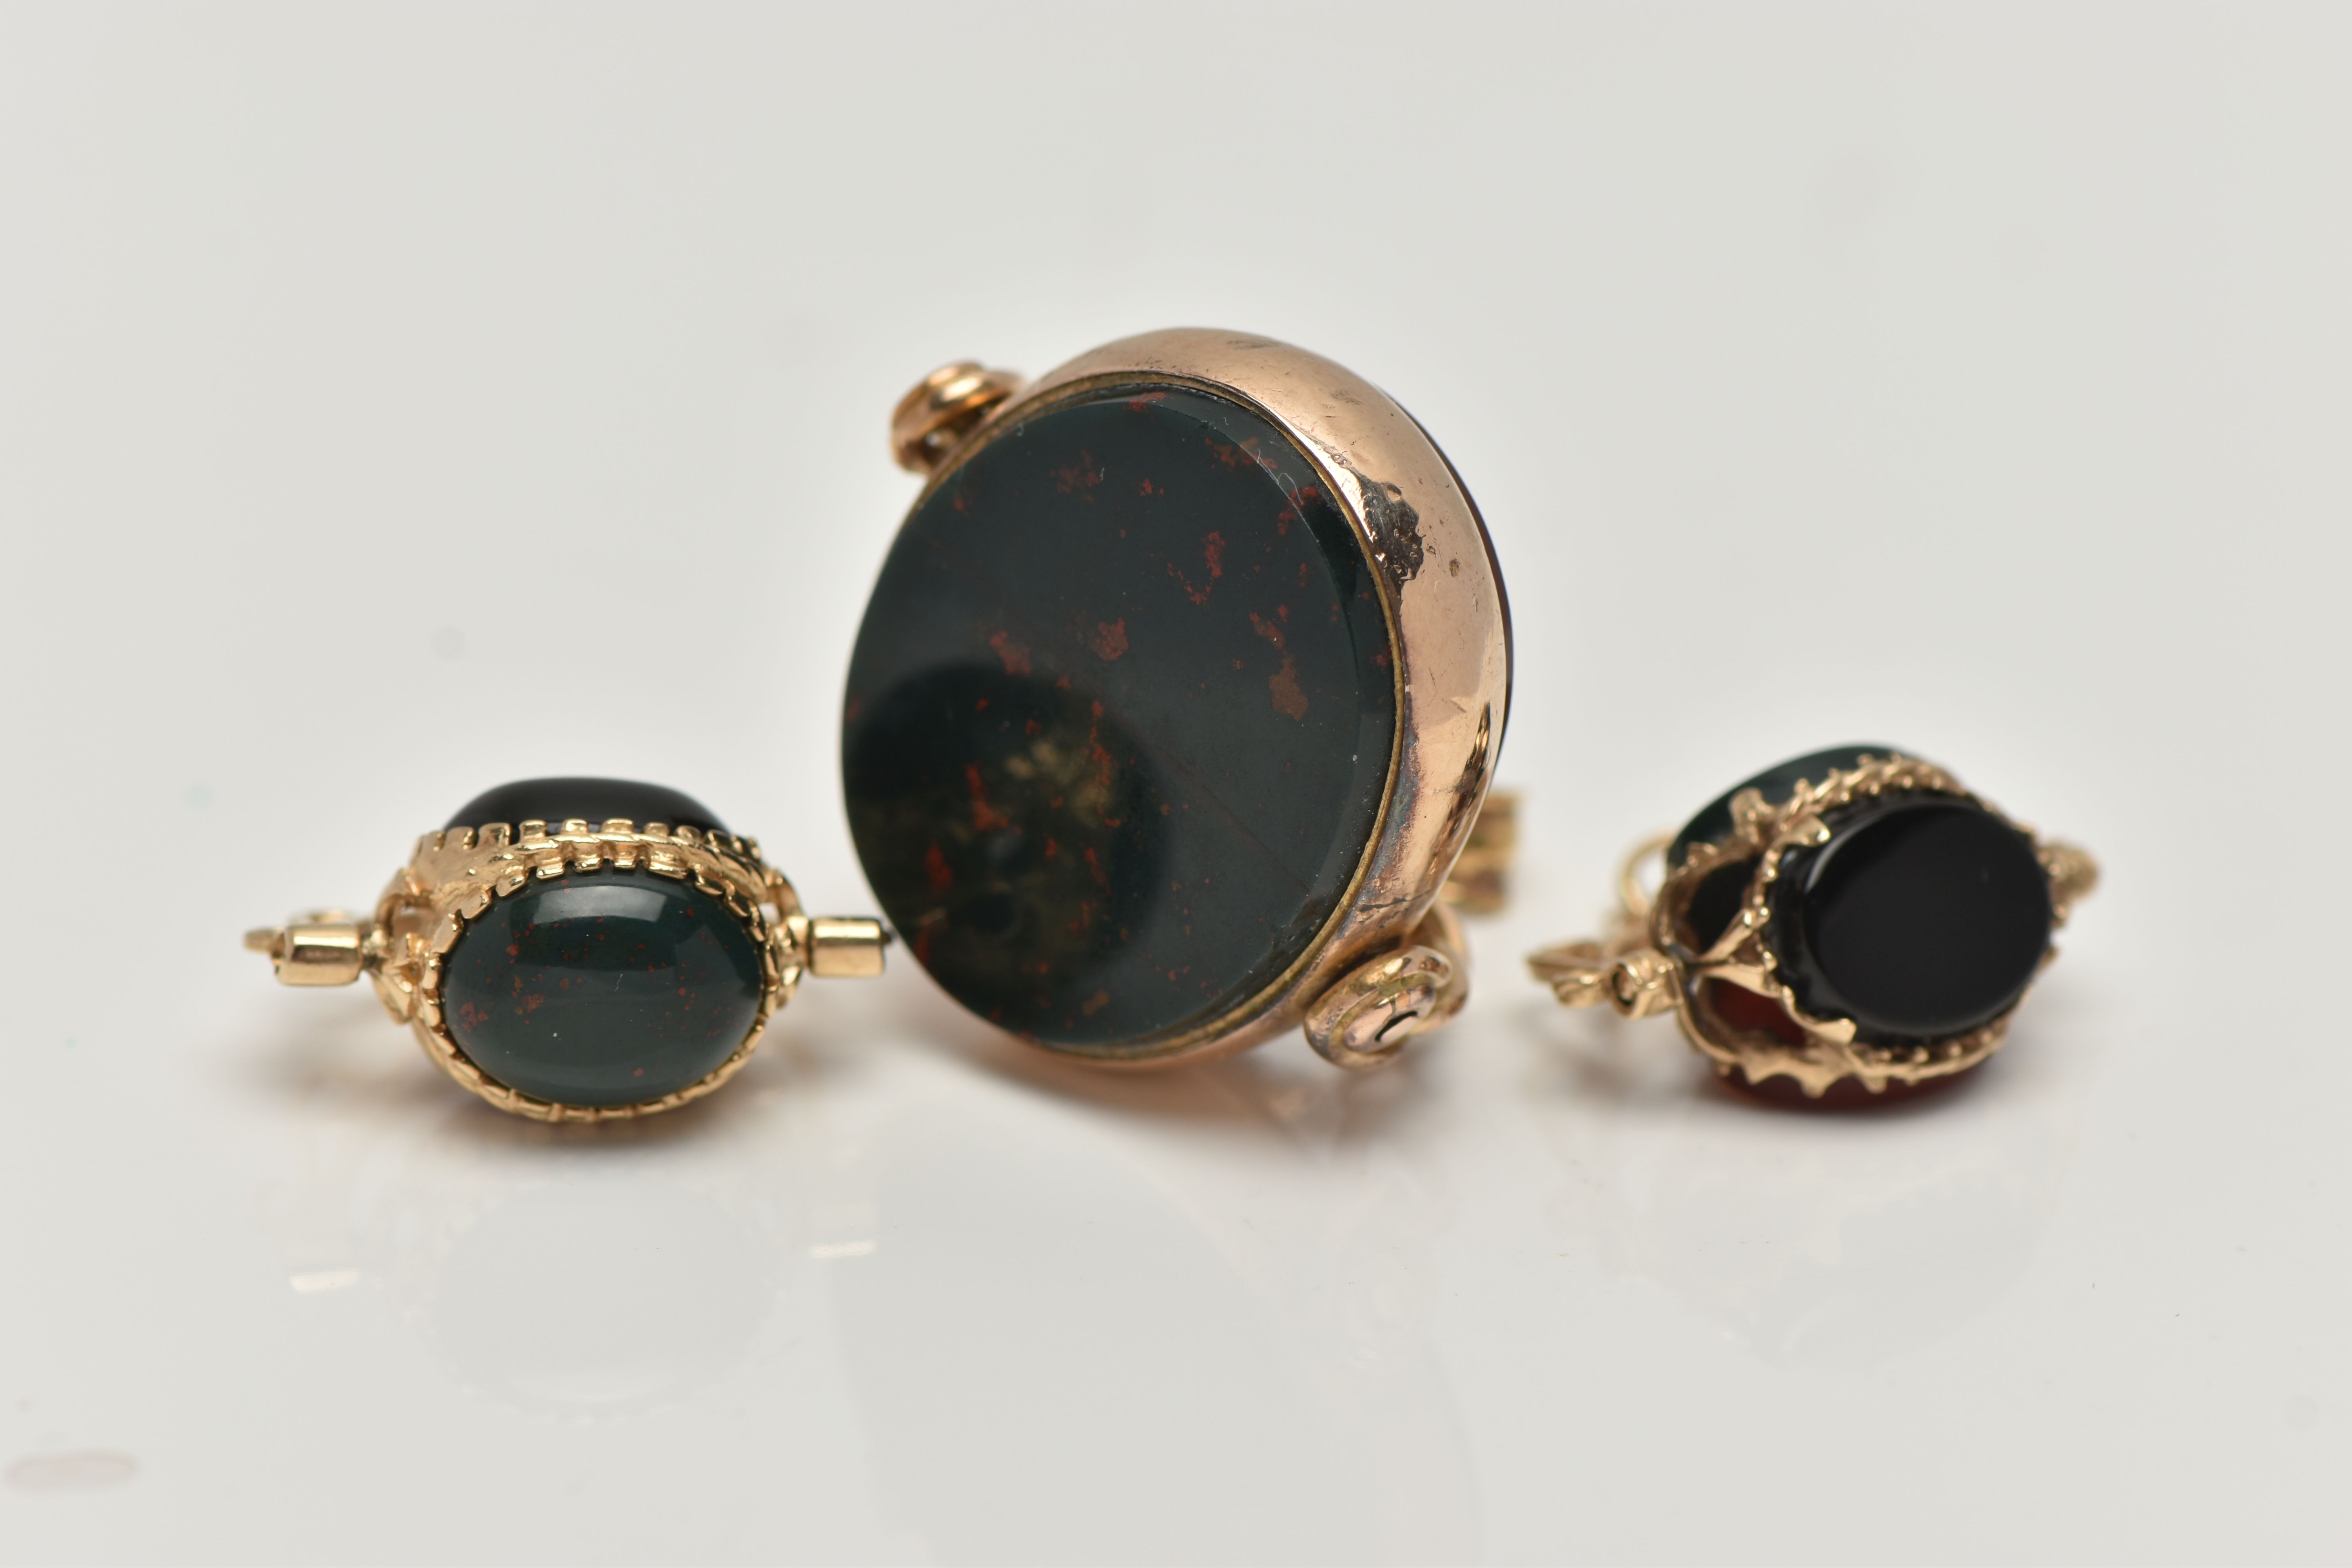 THREE SWIVEL PENDANTS, the first an oval swivel pendant set with a carnelian and a bloodstone inlay, - Image 2 of 4